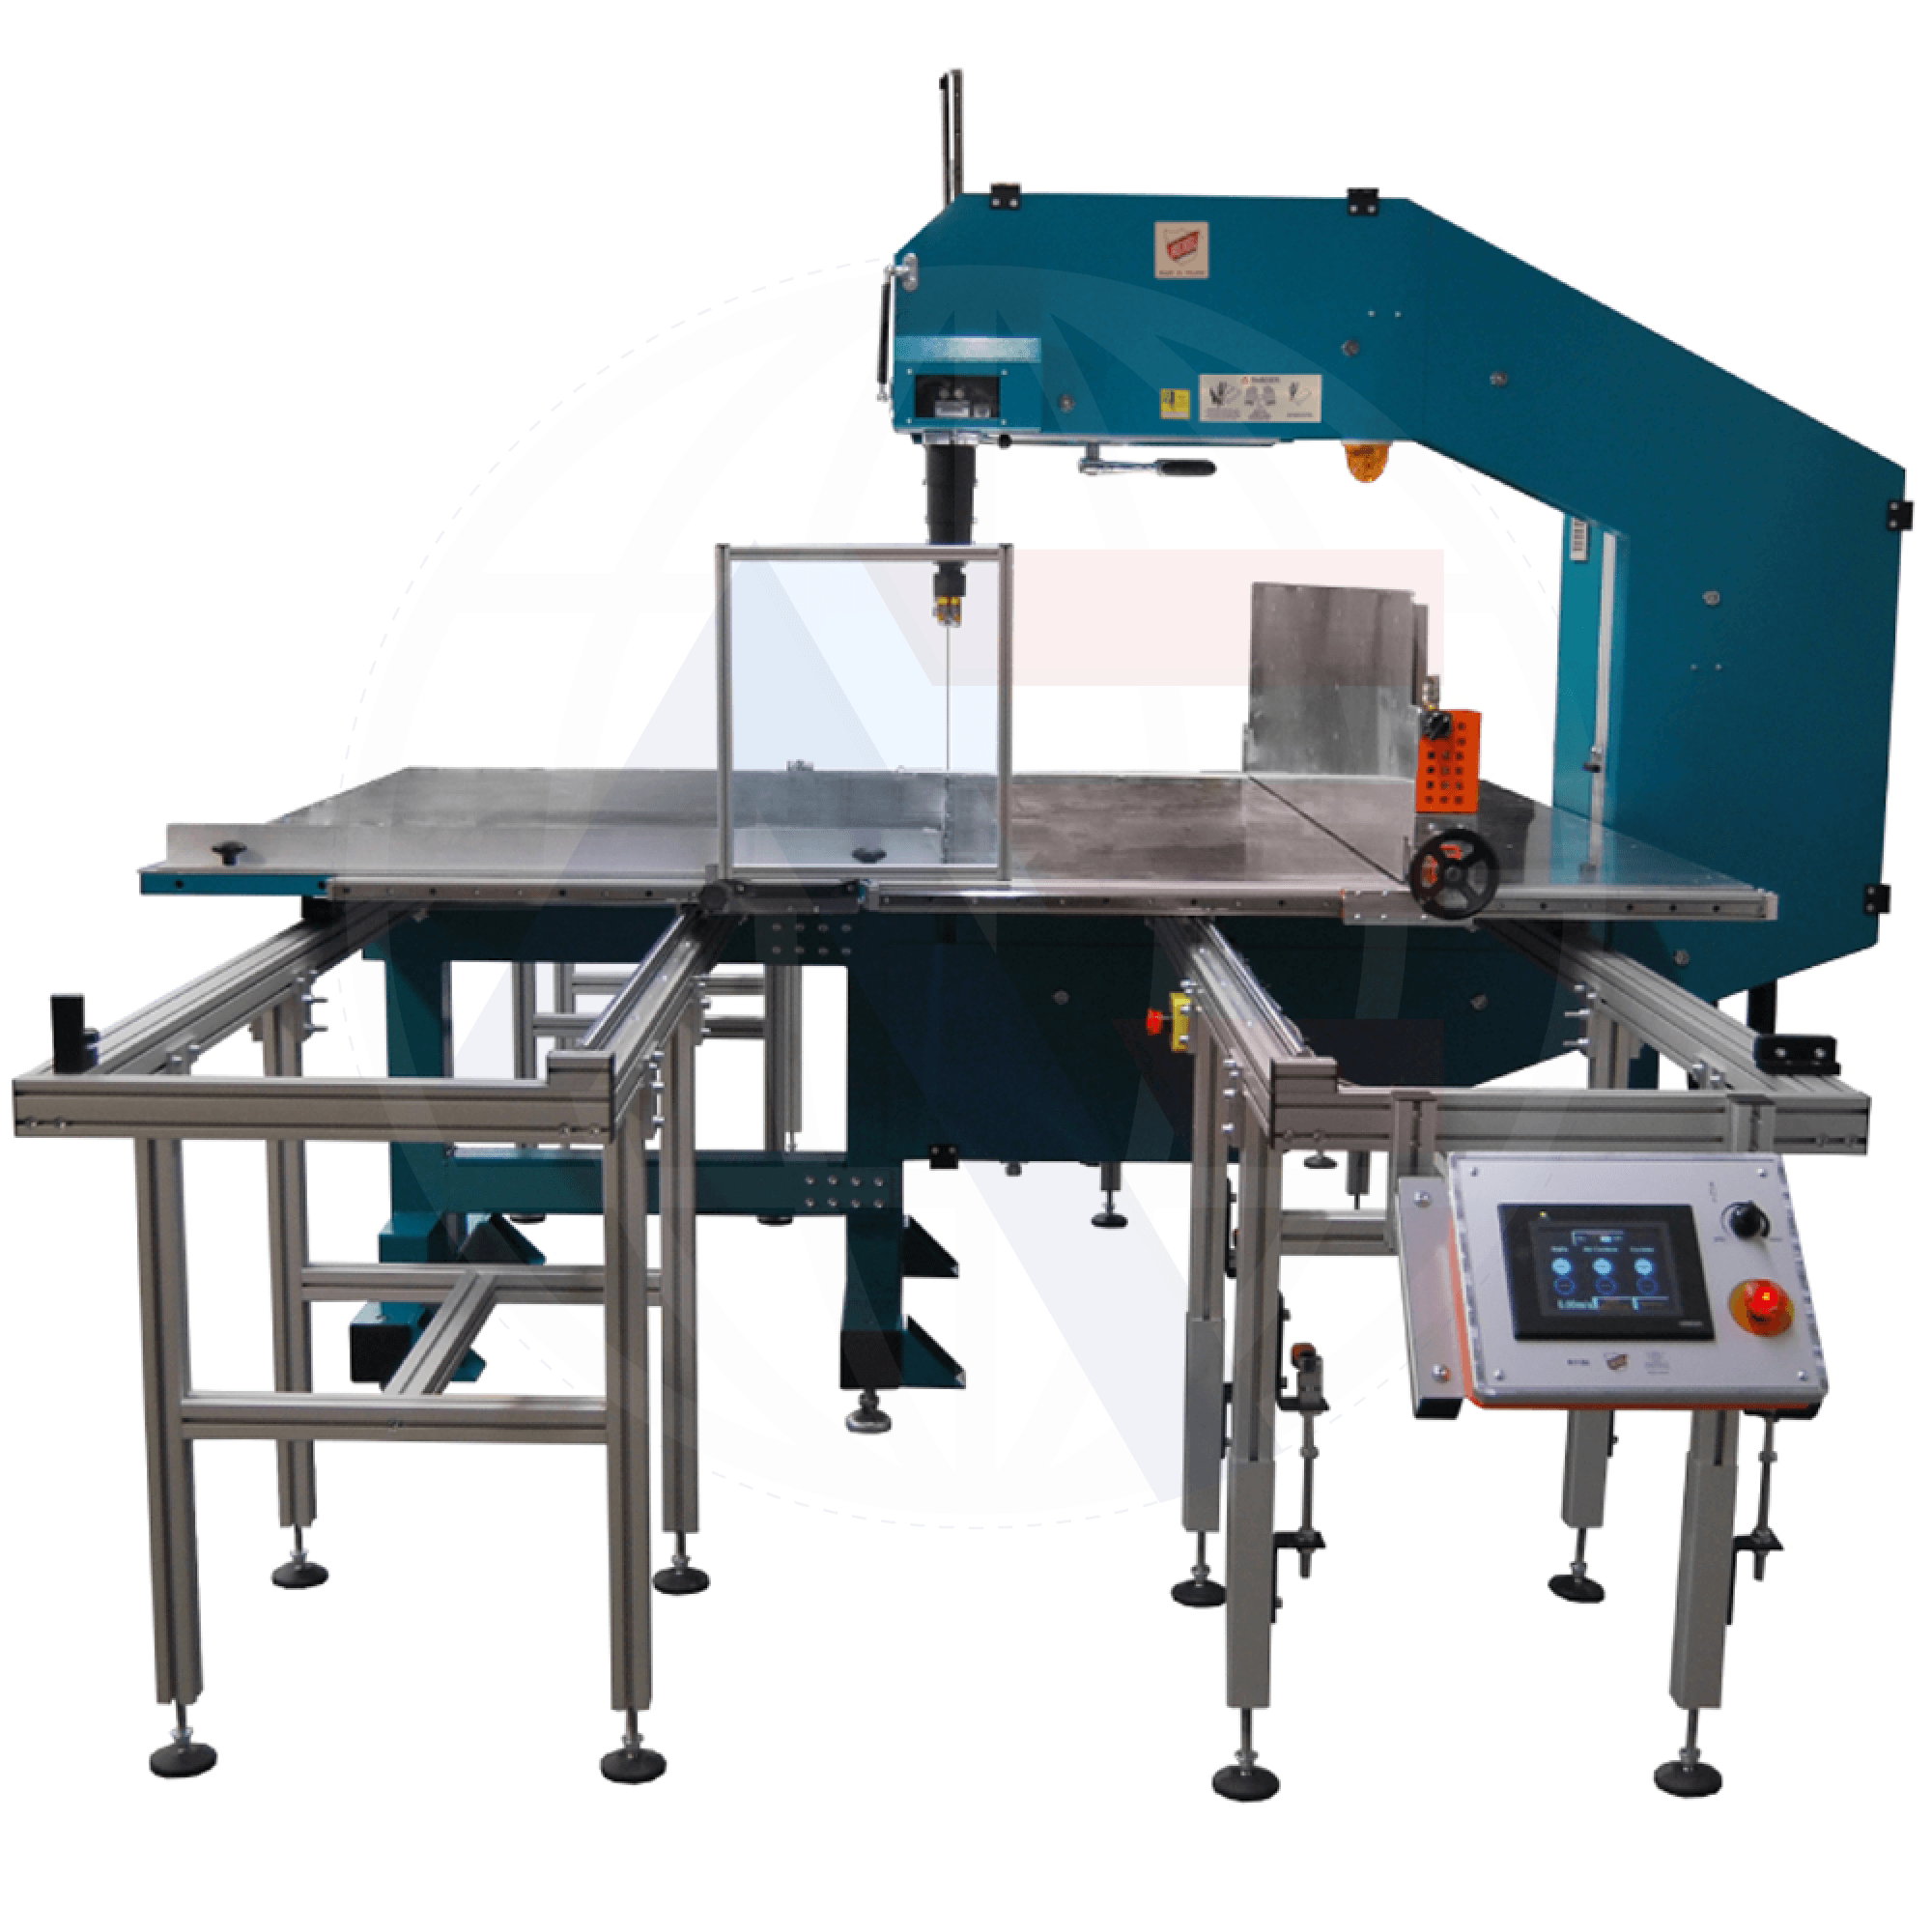 Rexel R1150/Pb Band Knife Cutting Machine With Sliding Table Machines